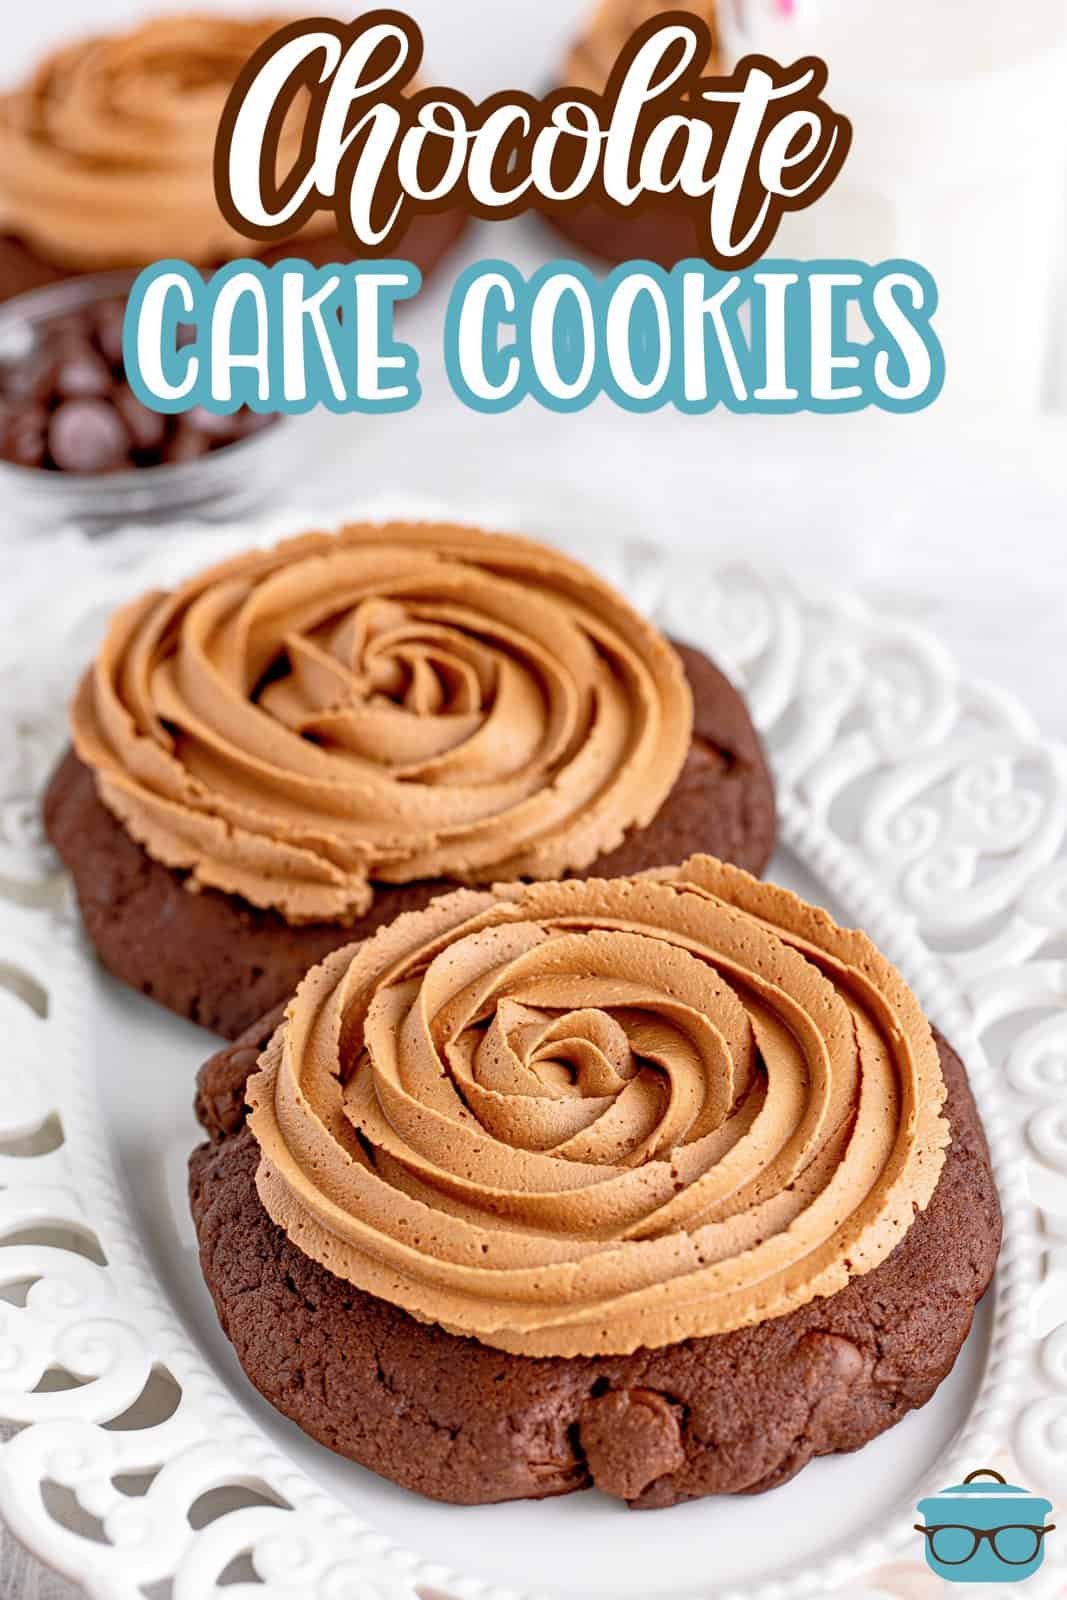 Two chocolate cake cookies with frosting on a plate.